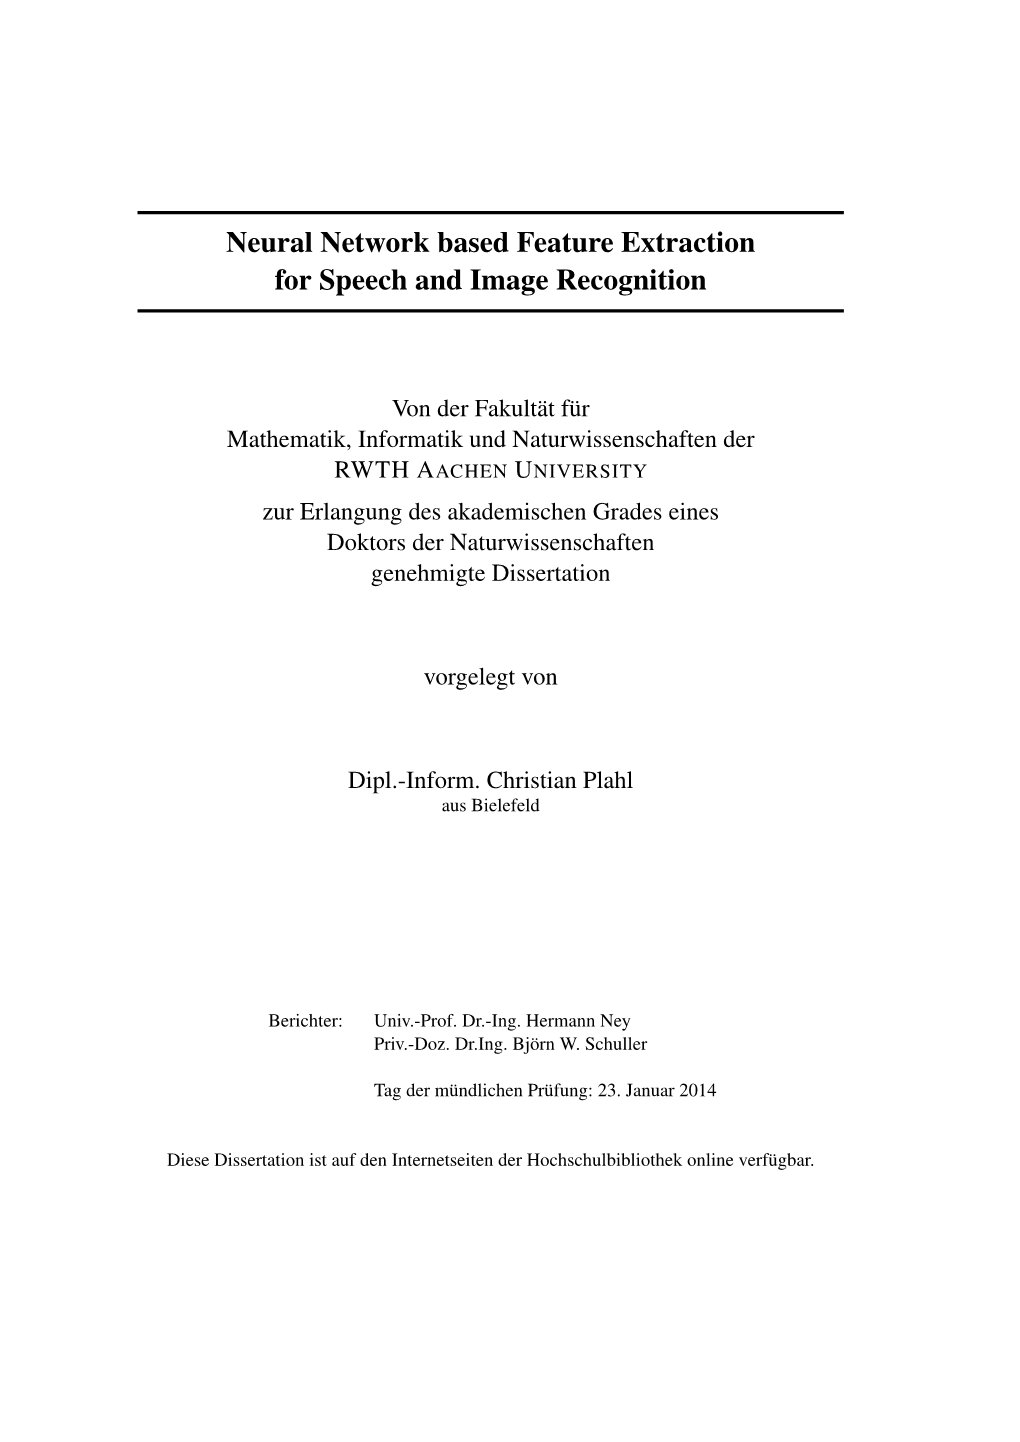 Neural Network Based Feature Extraction for Speech and Image Recognition